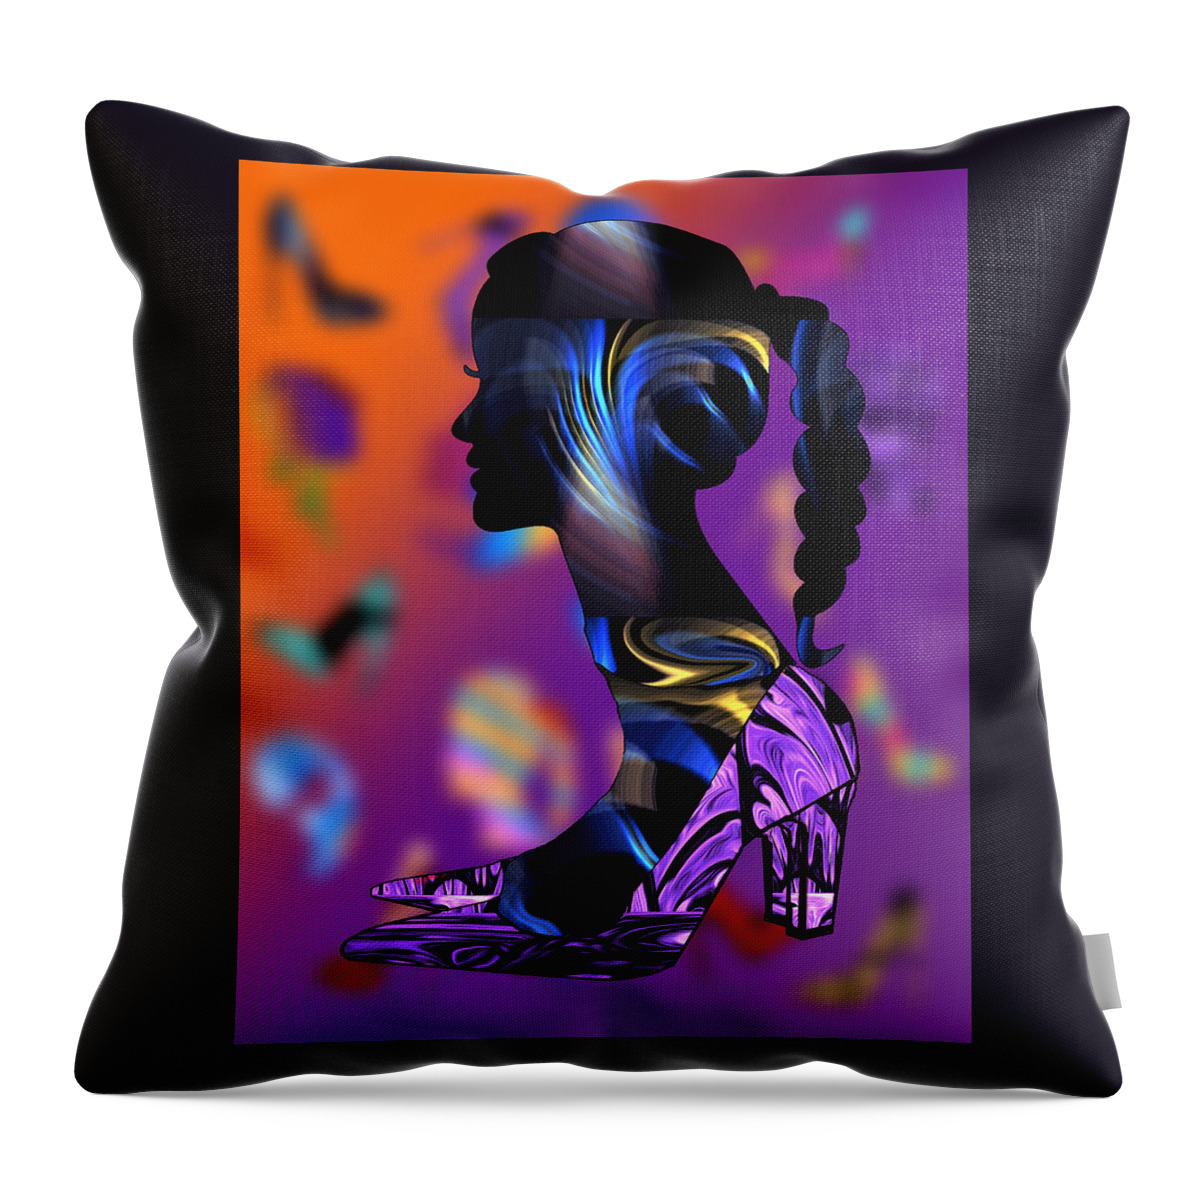 Abstract Throw Pillow featuring the digital art Head Over Heels - No.3 by Ronald Mills